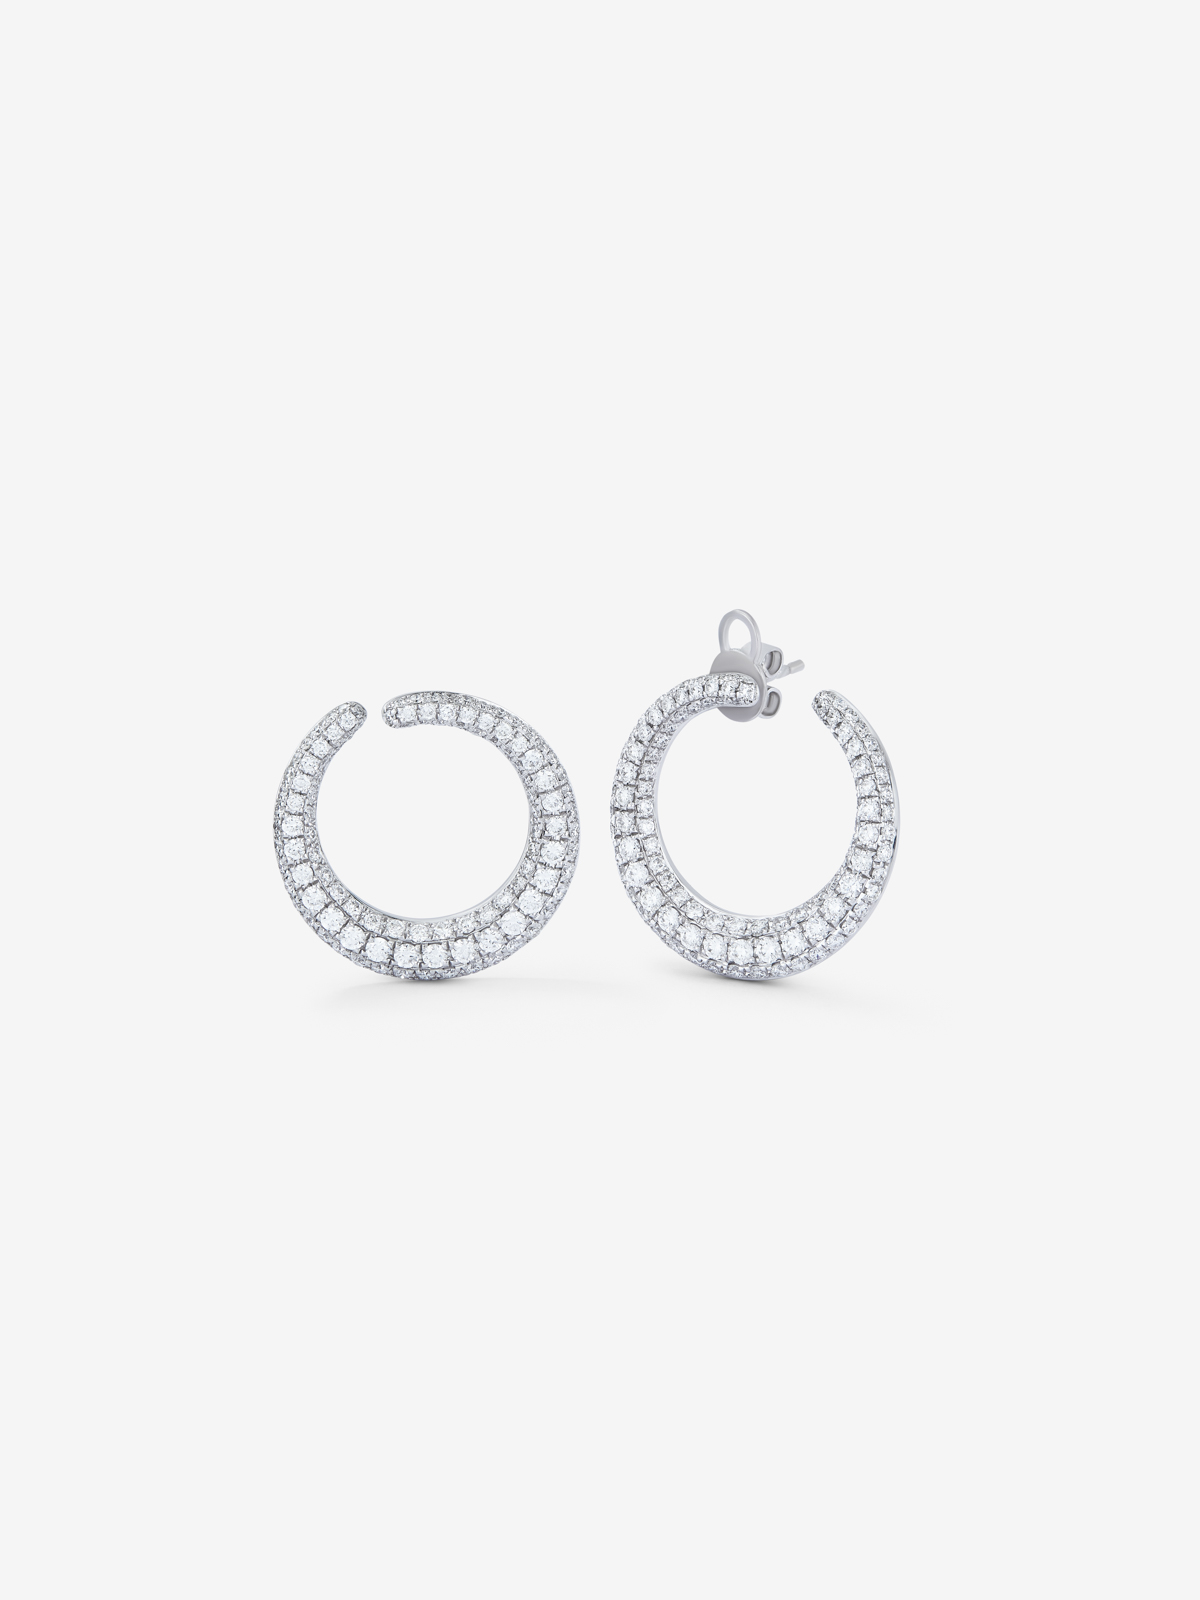 Small open 18K white open ring earrings with diamond paw